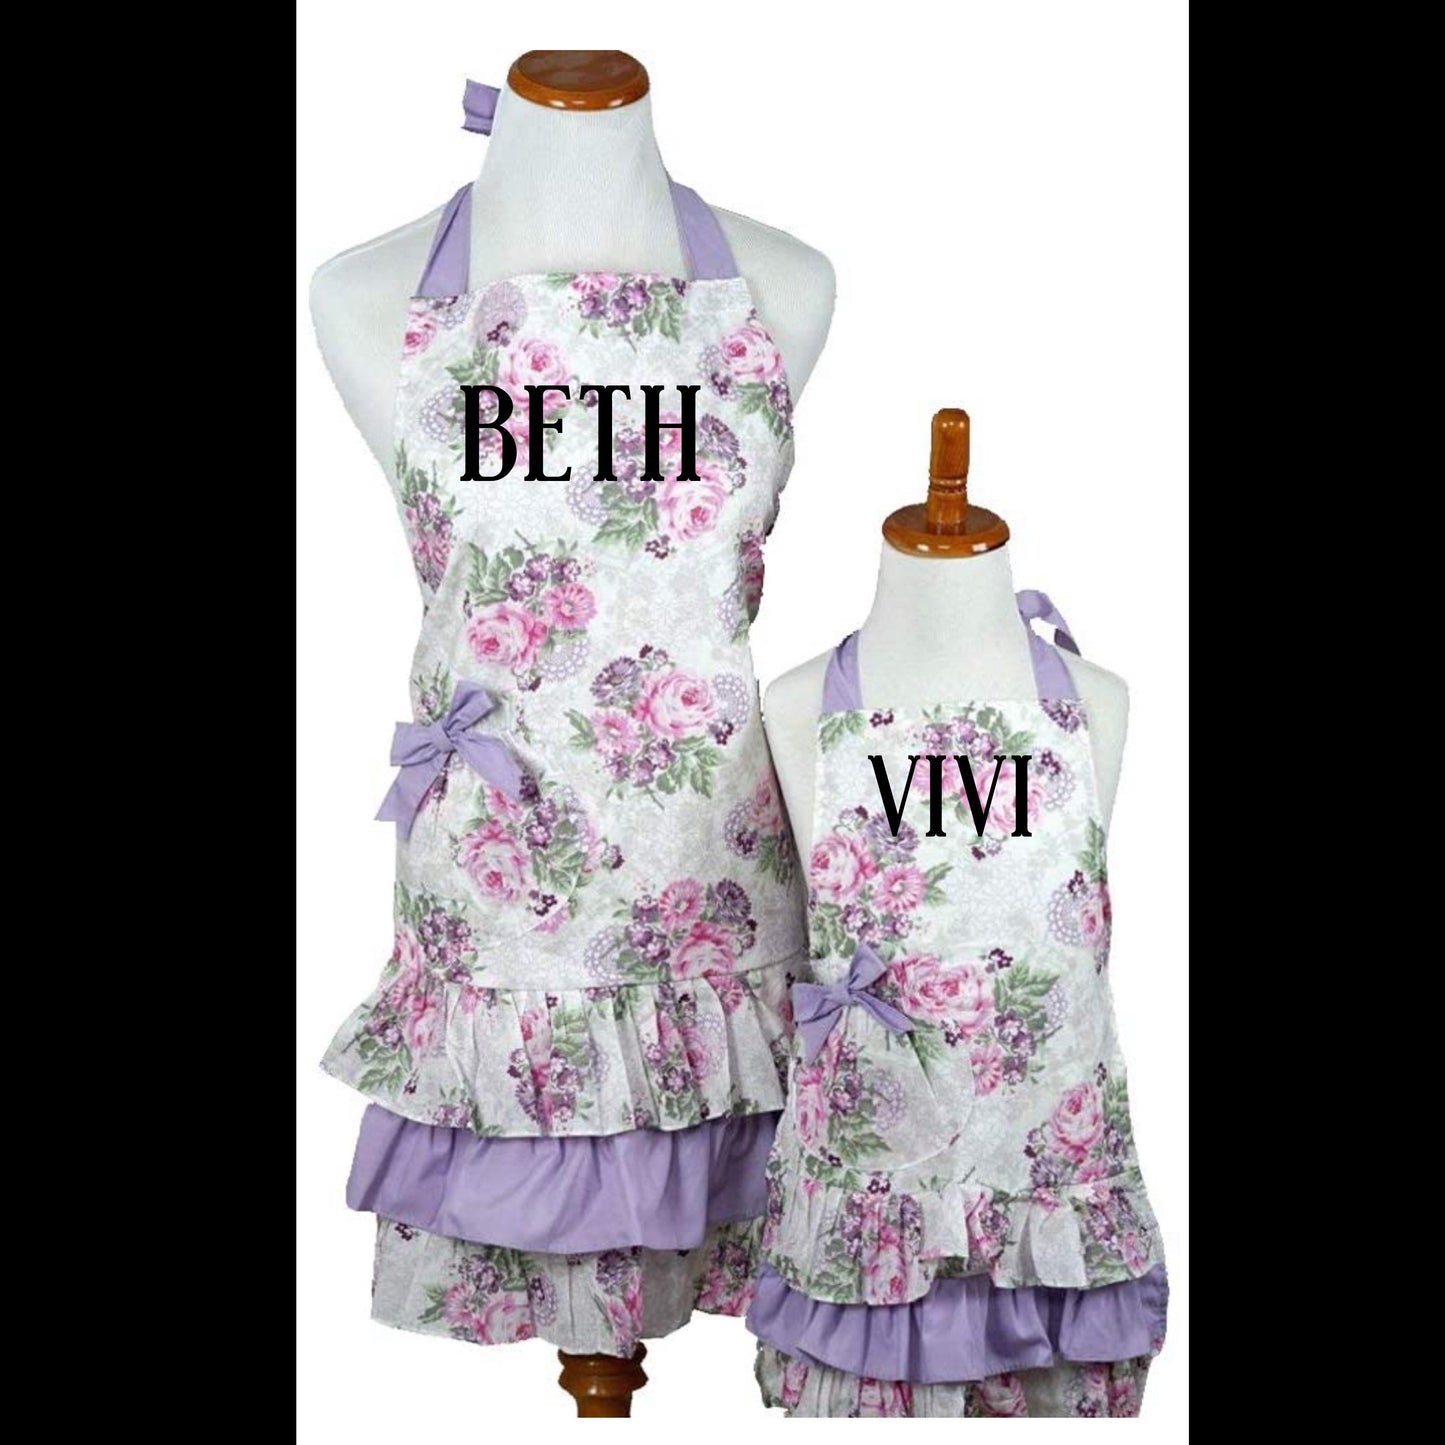 Mommy and me aprons, mom and kid cooking apron set, personalized apron, mommy and me set, cupcake apron set, matching aprons, custom aprons